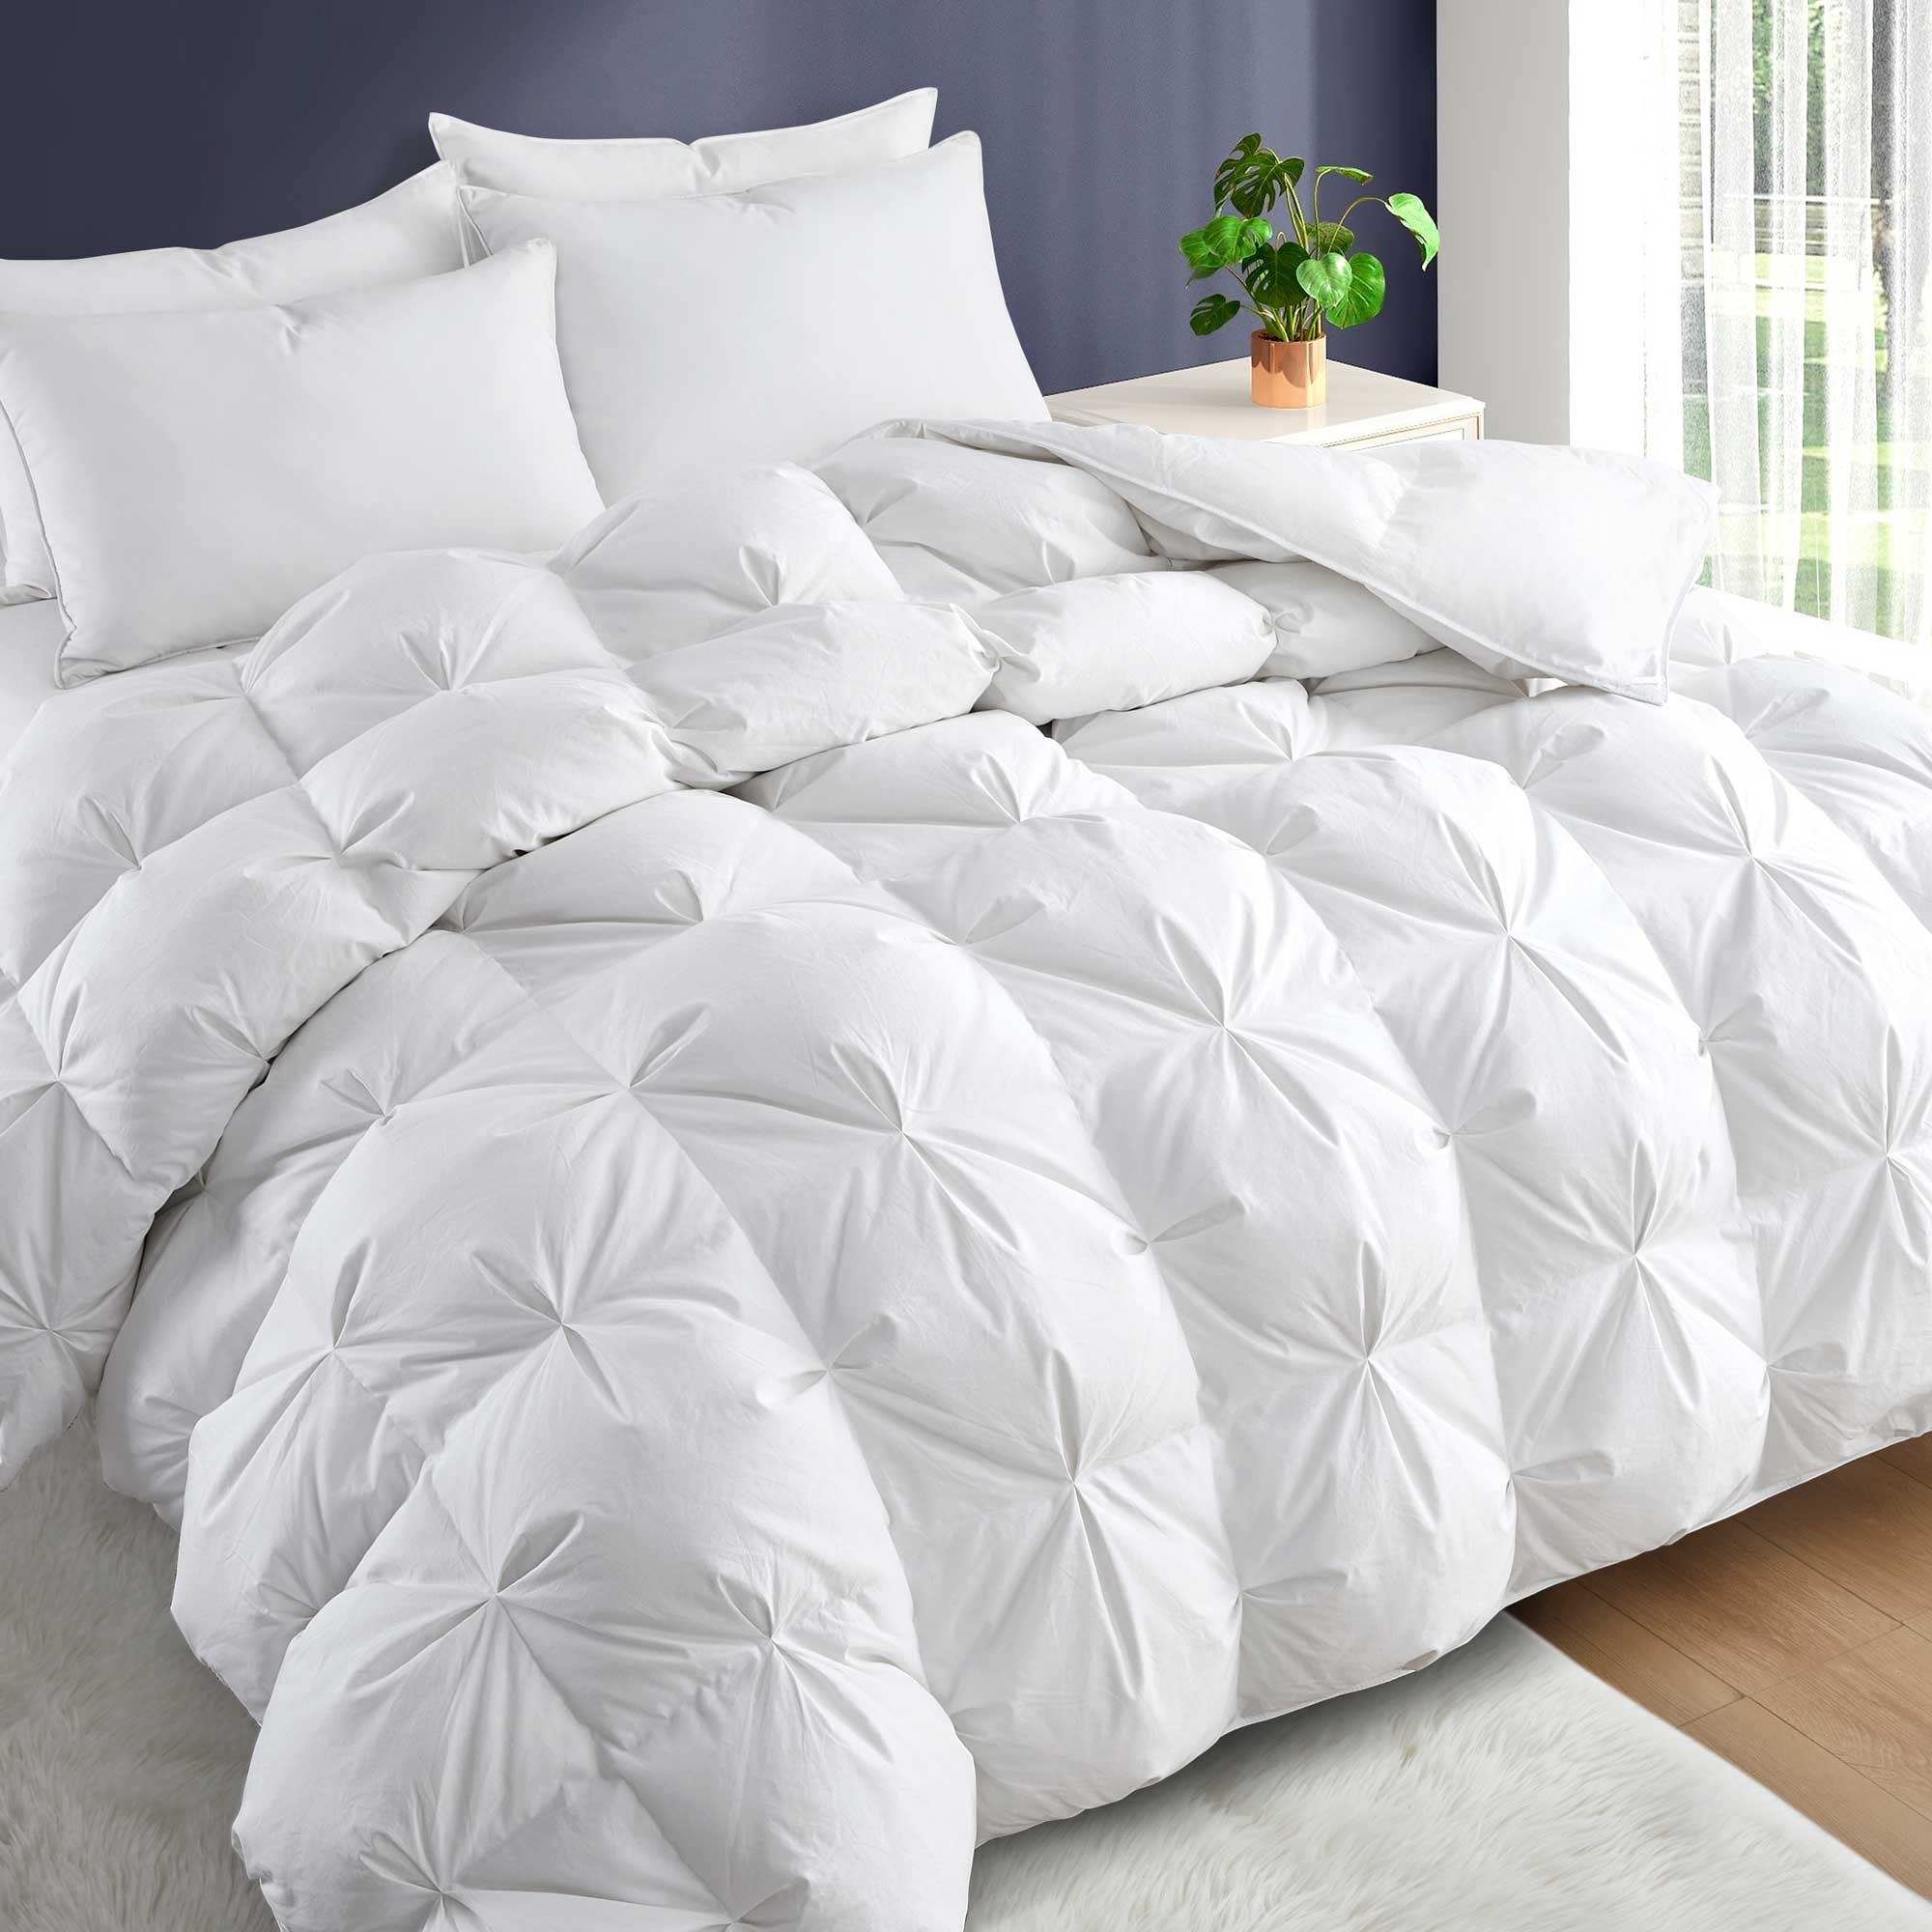 Luxury 800 Fill Power White Goose Down Winter Comforter-Extra Warm Super Soft Heavy Weight Comforter - White, King